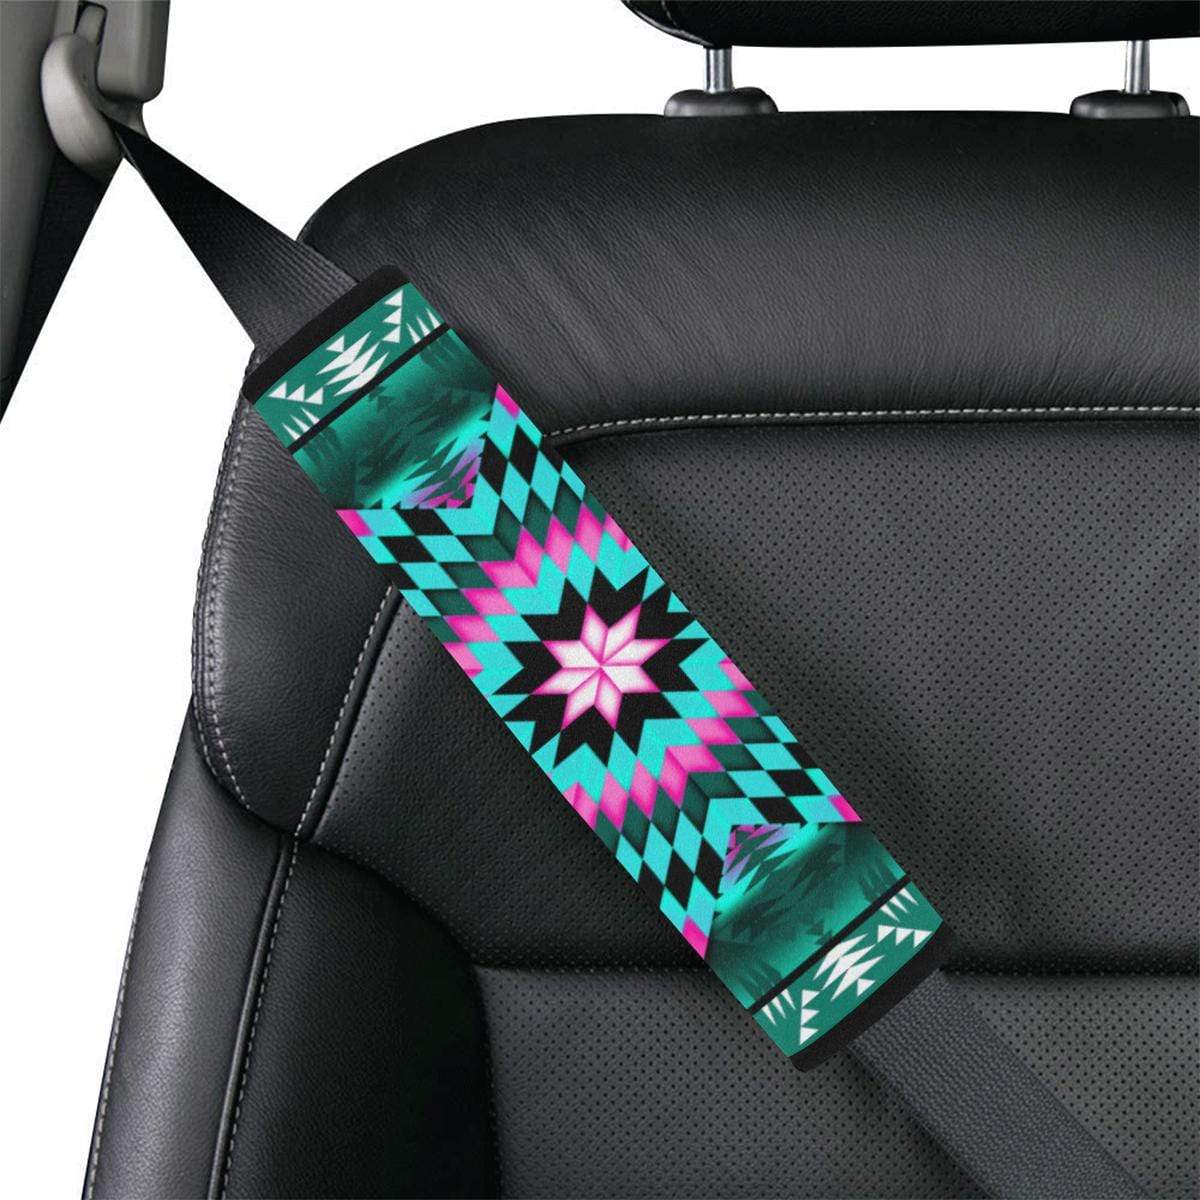 Deep Lake and Sunset Star Car Seat Belt Cover 7''x12.6'' Car Seat Belt Cover 7''x12.6'' e-joyer 